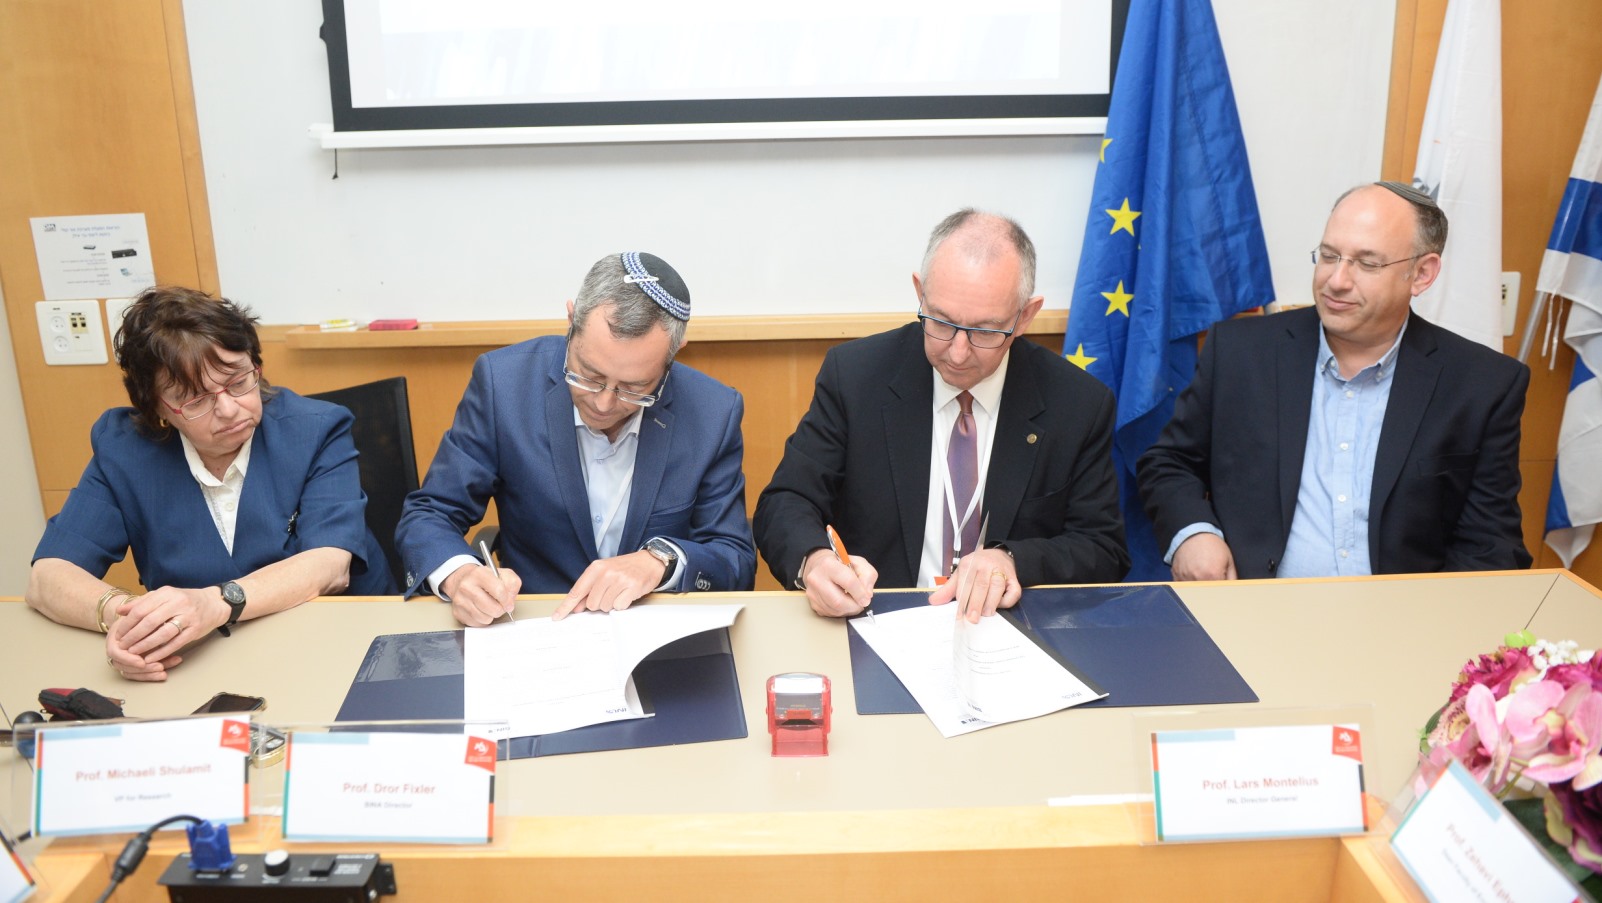 Prof. Dror Fixler, second from left, and Prof. Lars Montelius sign the nanotech cooperation agreement as Bar-Ilan Vice President for Research Shulamit Michaeli and Deputy President Moshe Lewenstein look on. Photo by Chen Damari